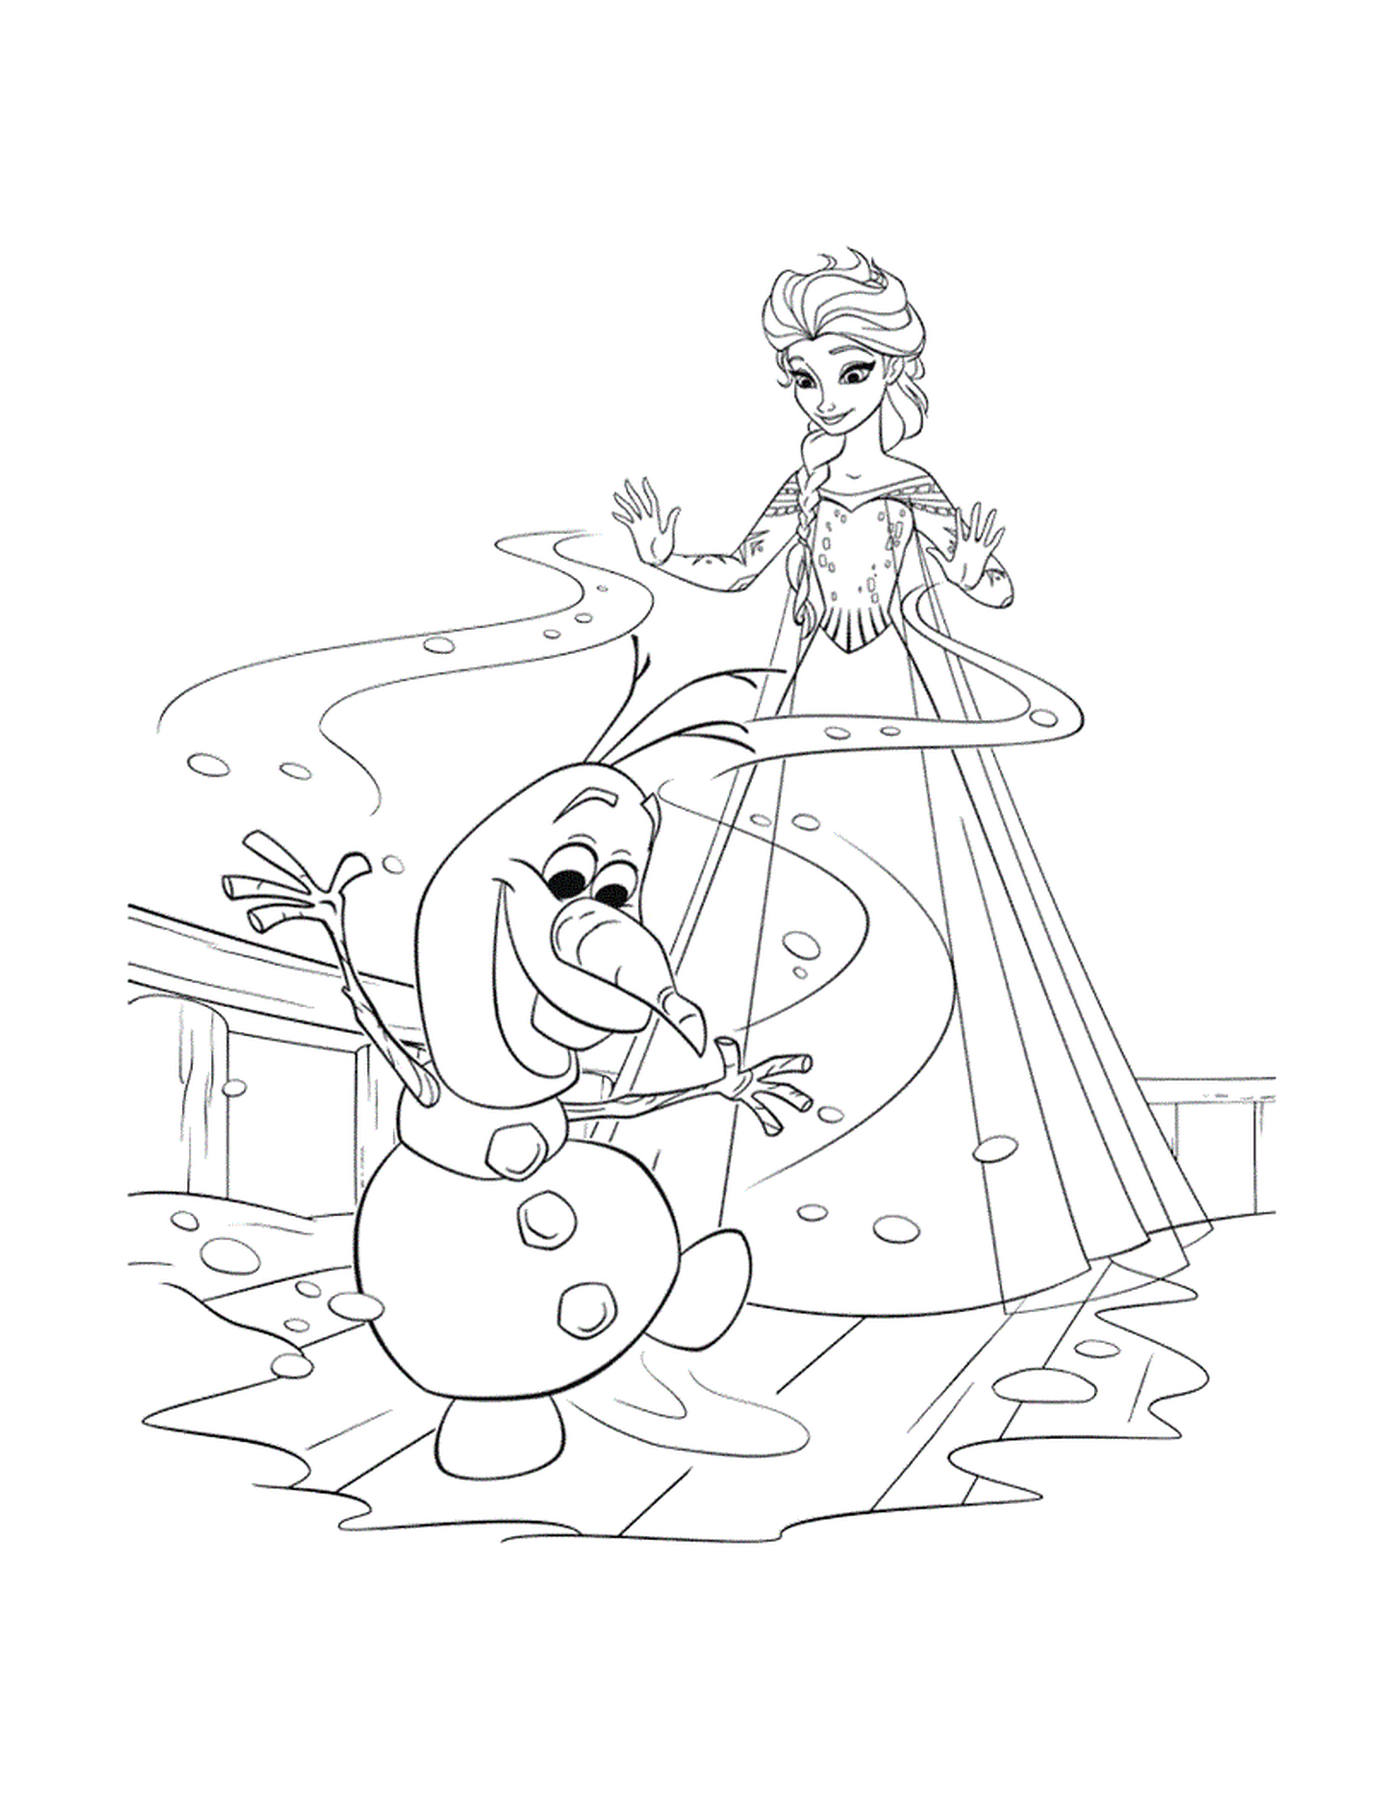  Elsa and Olaf accomplices 